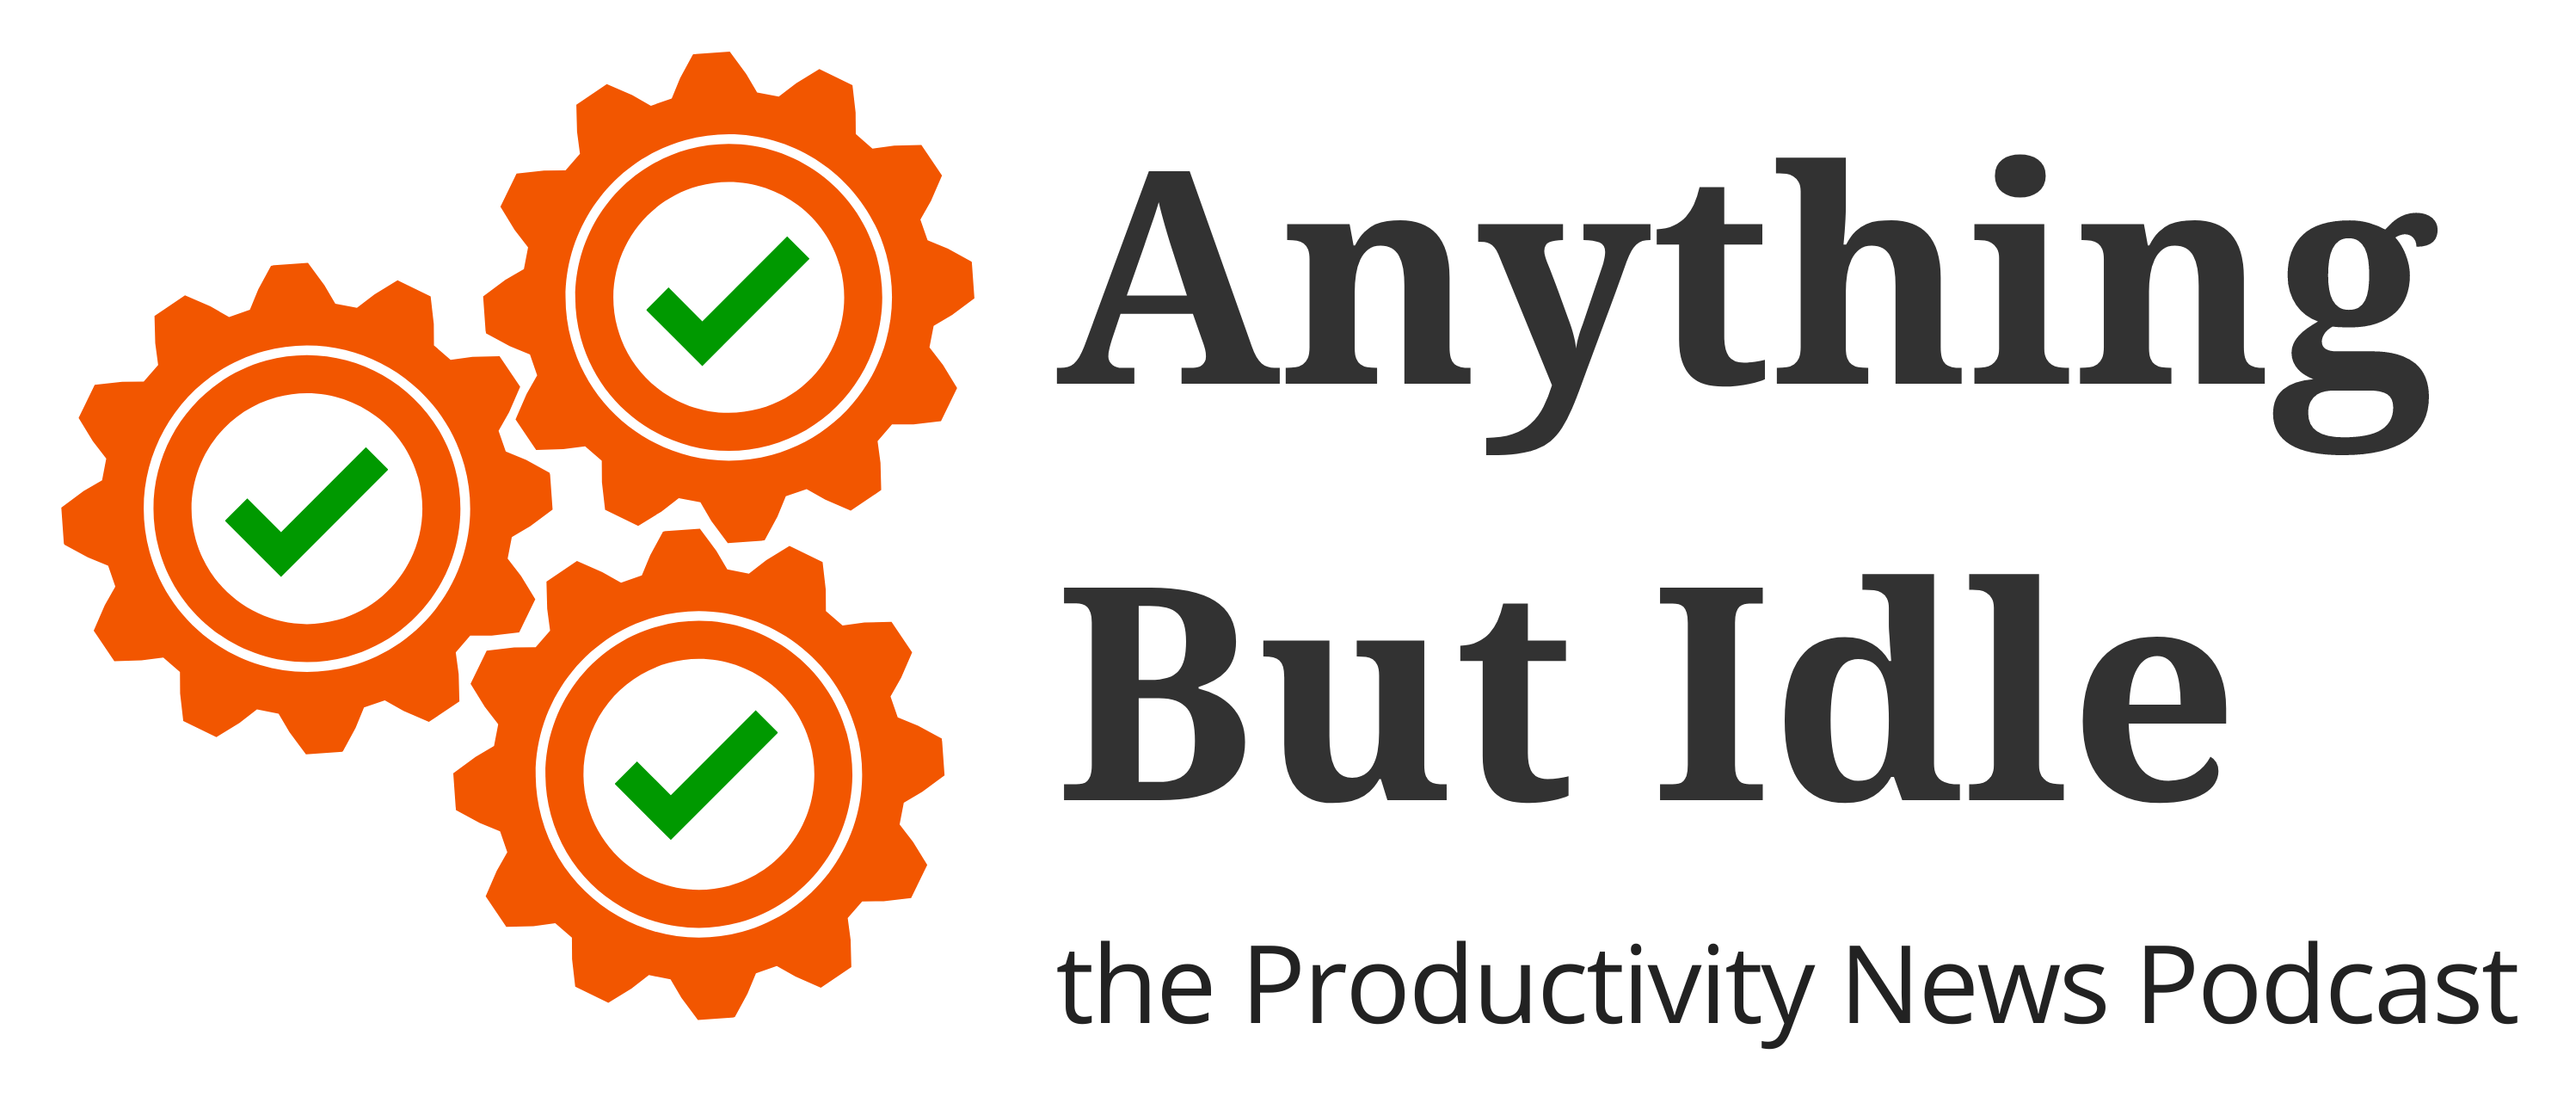 Anything But Idle, the Productivity News Podcast